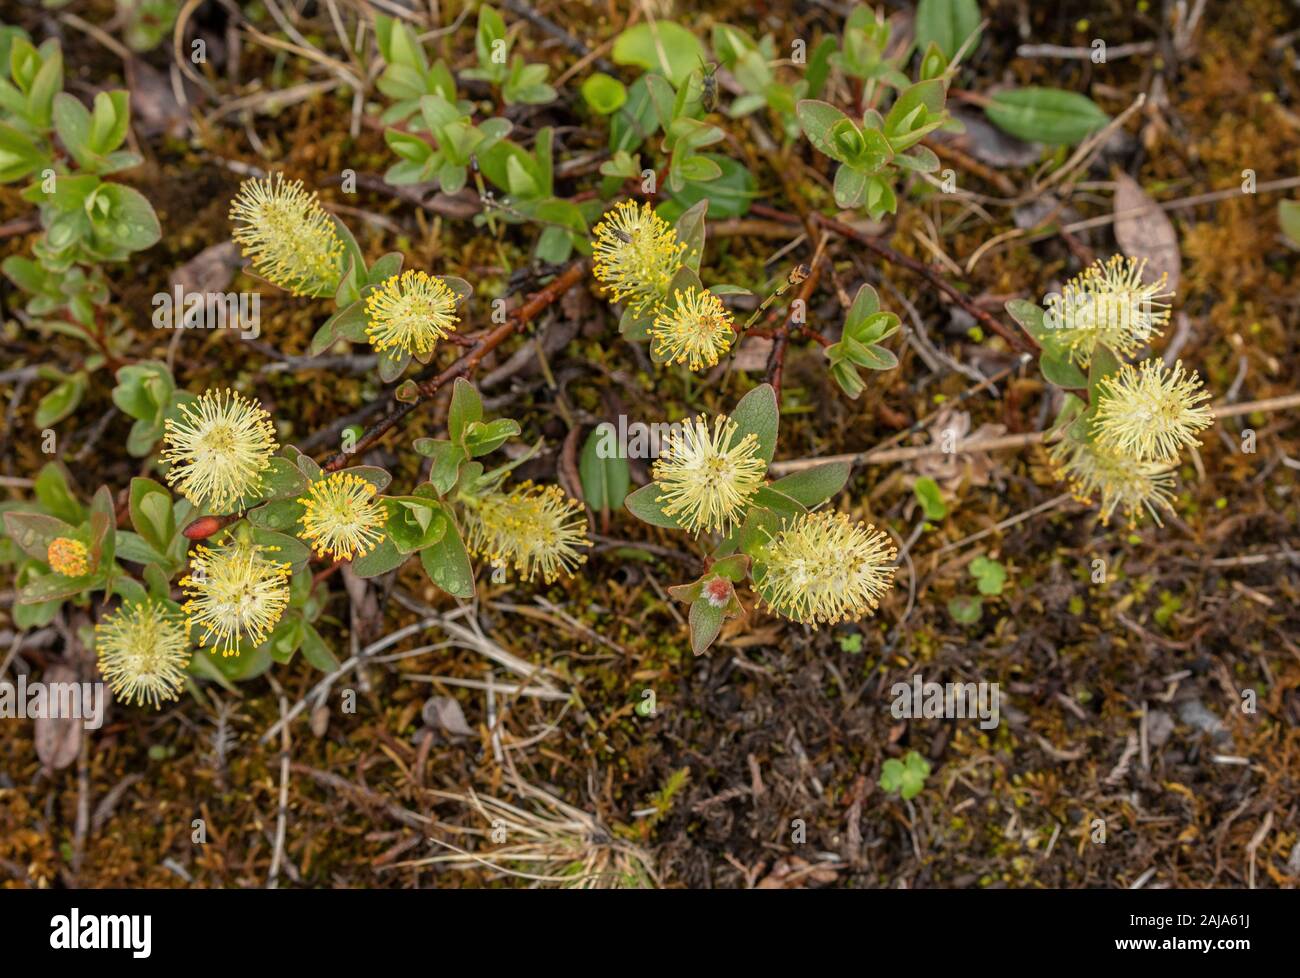 Mountain willow, Salix arbuscula in flower with male catkins. Arctic Sweden. Stock Photo